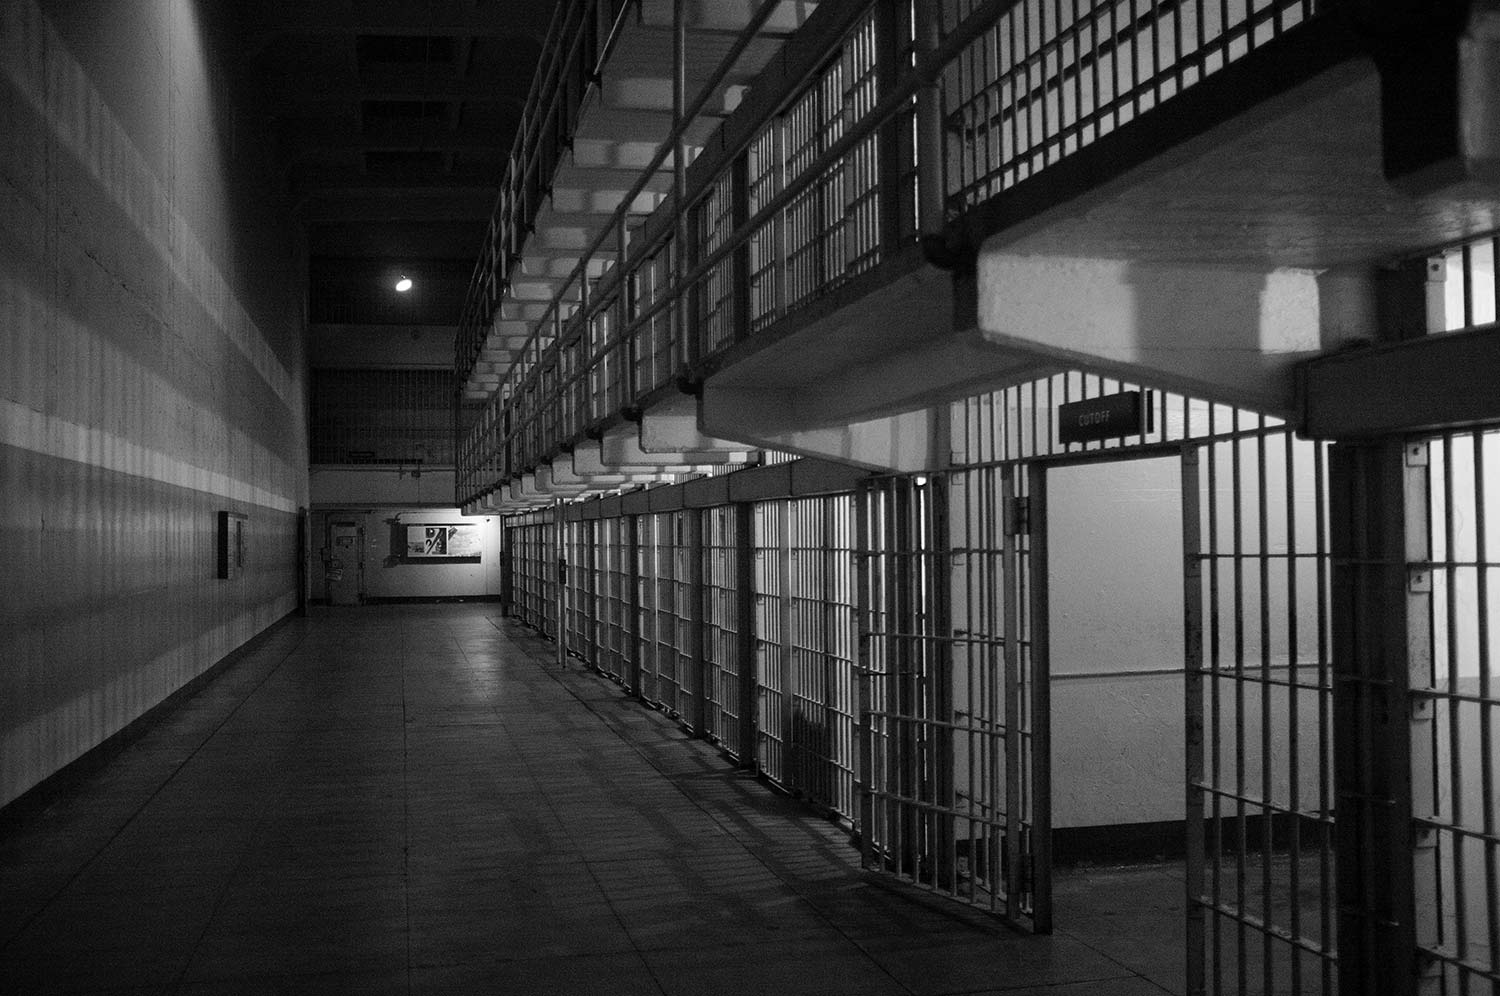 inside a jail hallway, black and white